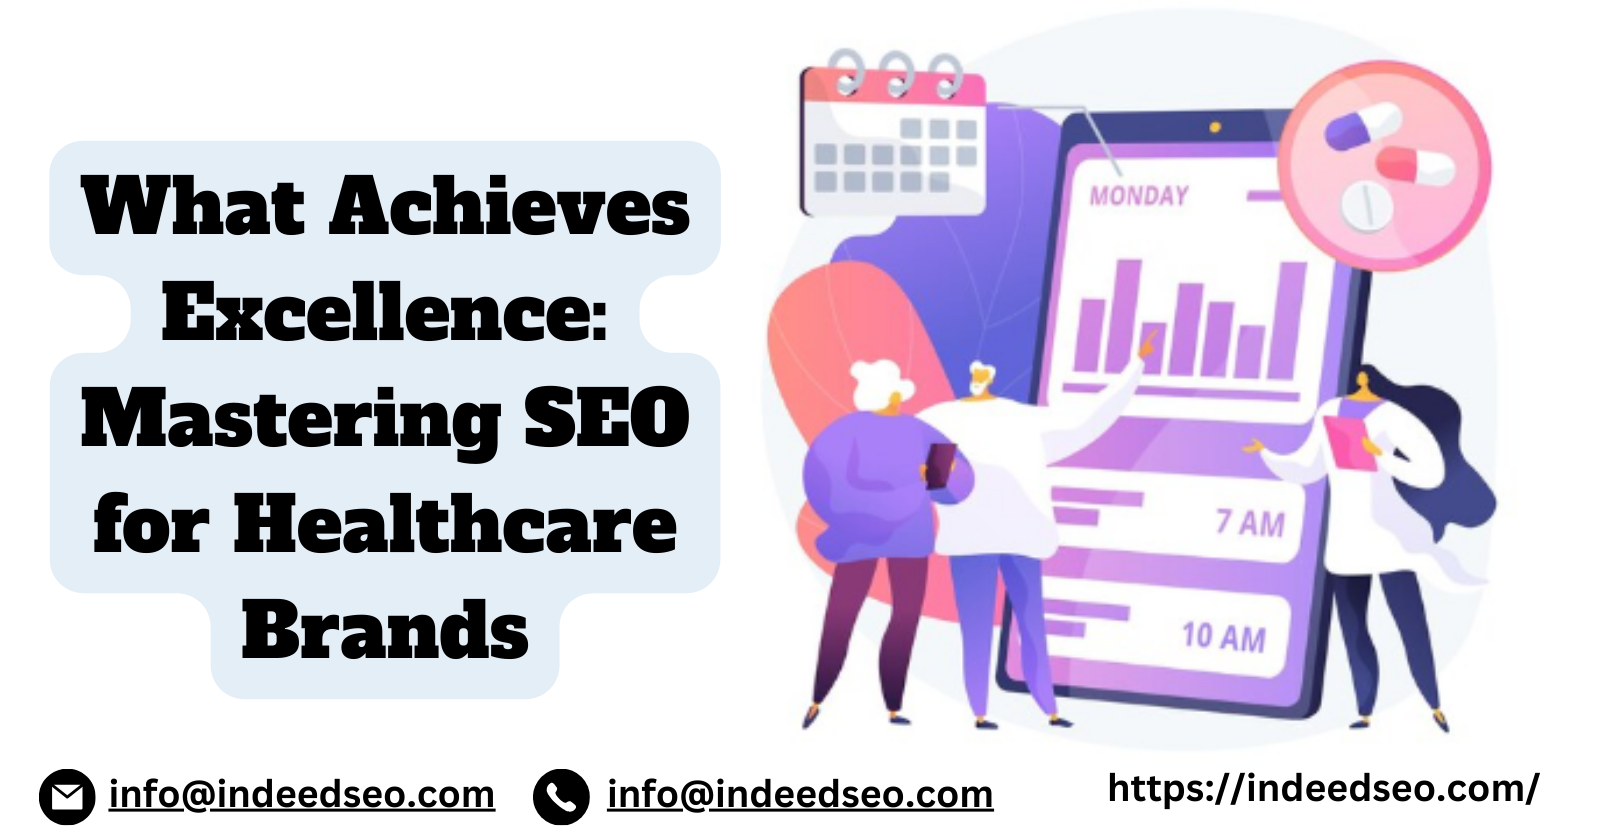 What Achieves Excellence: Mastering SEO for Healthcare Brands